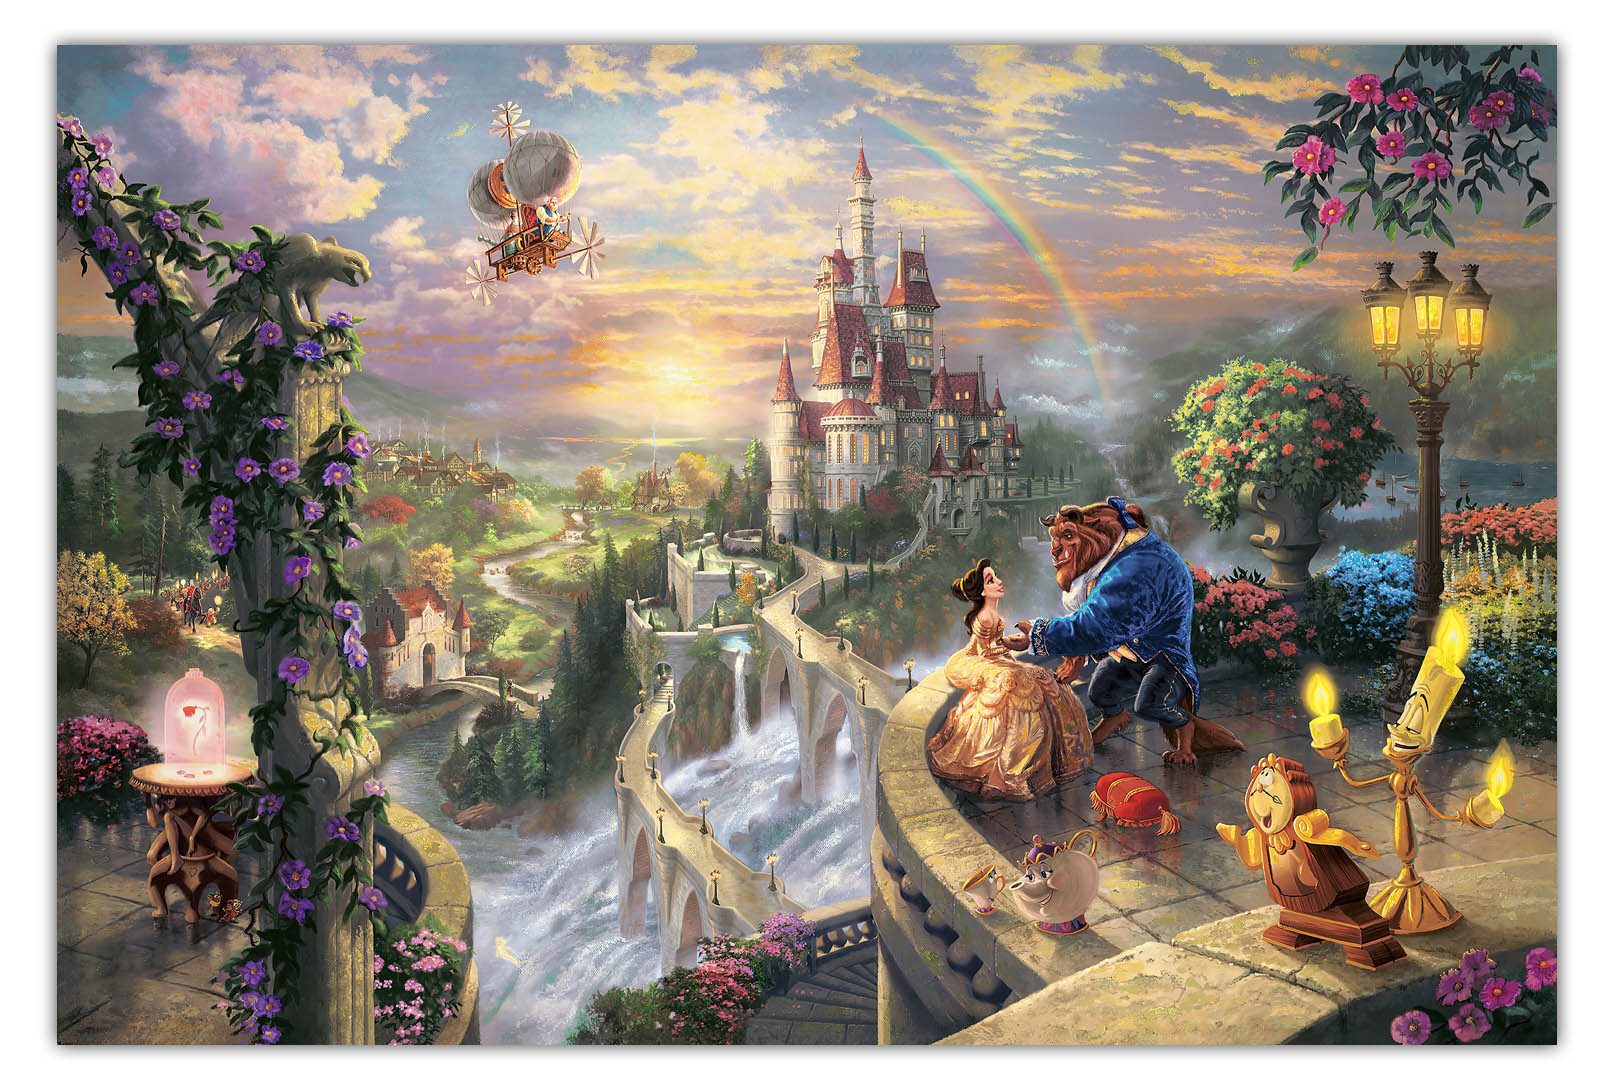 Beauty and the Beast Falling in Love by Thomas Kinkade